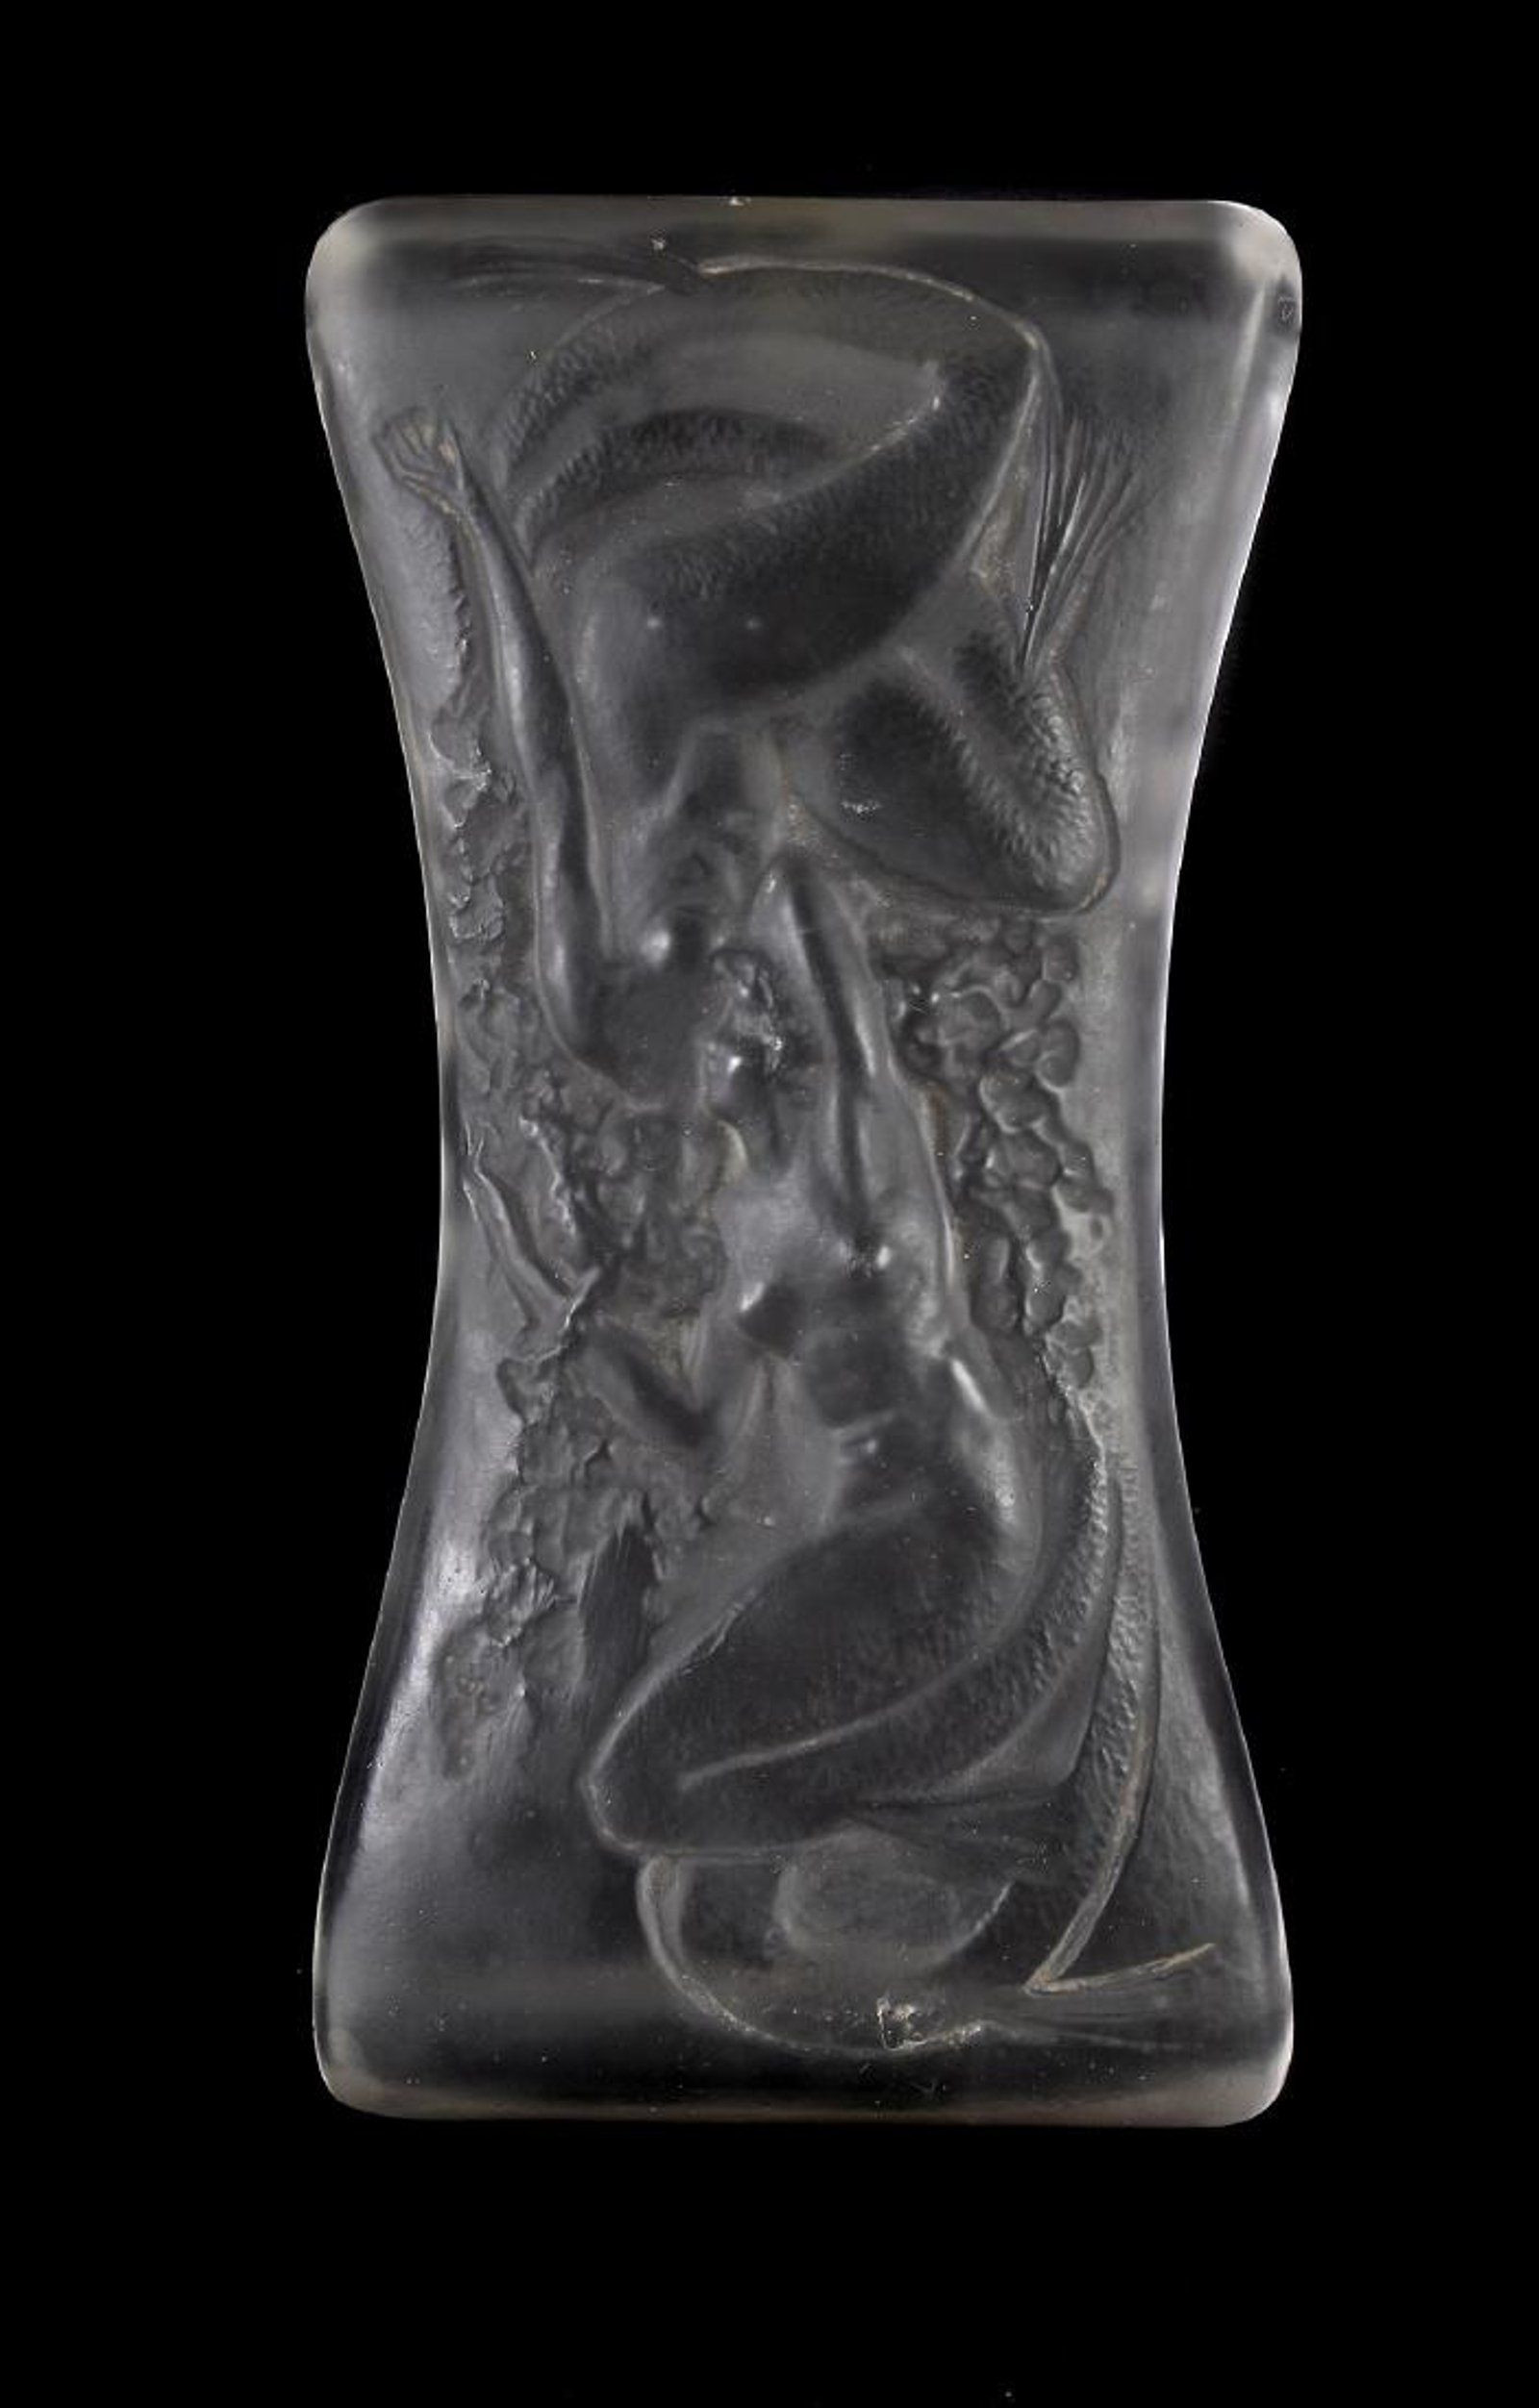 20 Elegant Lalique Vases Images 2024 free download lalique vases images of lalique rene lalique deux sirenes couchees face a on lalique intended for rene lalique deux sirenes couchaes face a face a frosted glass